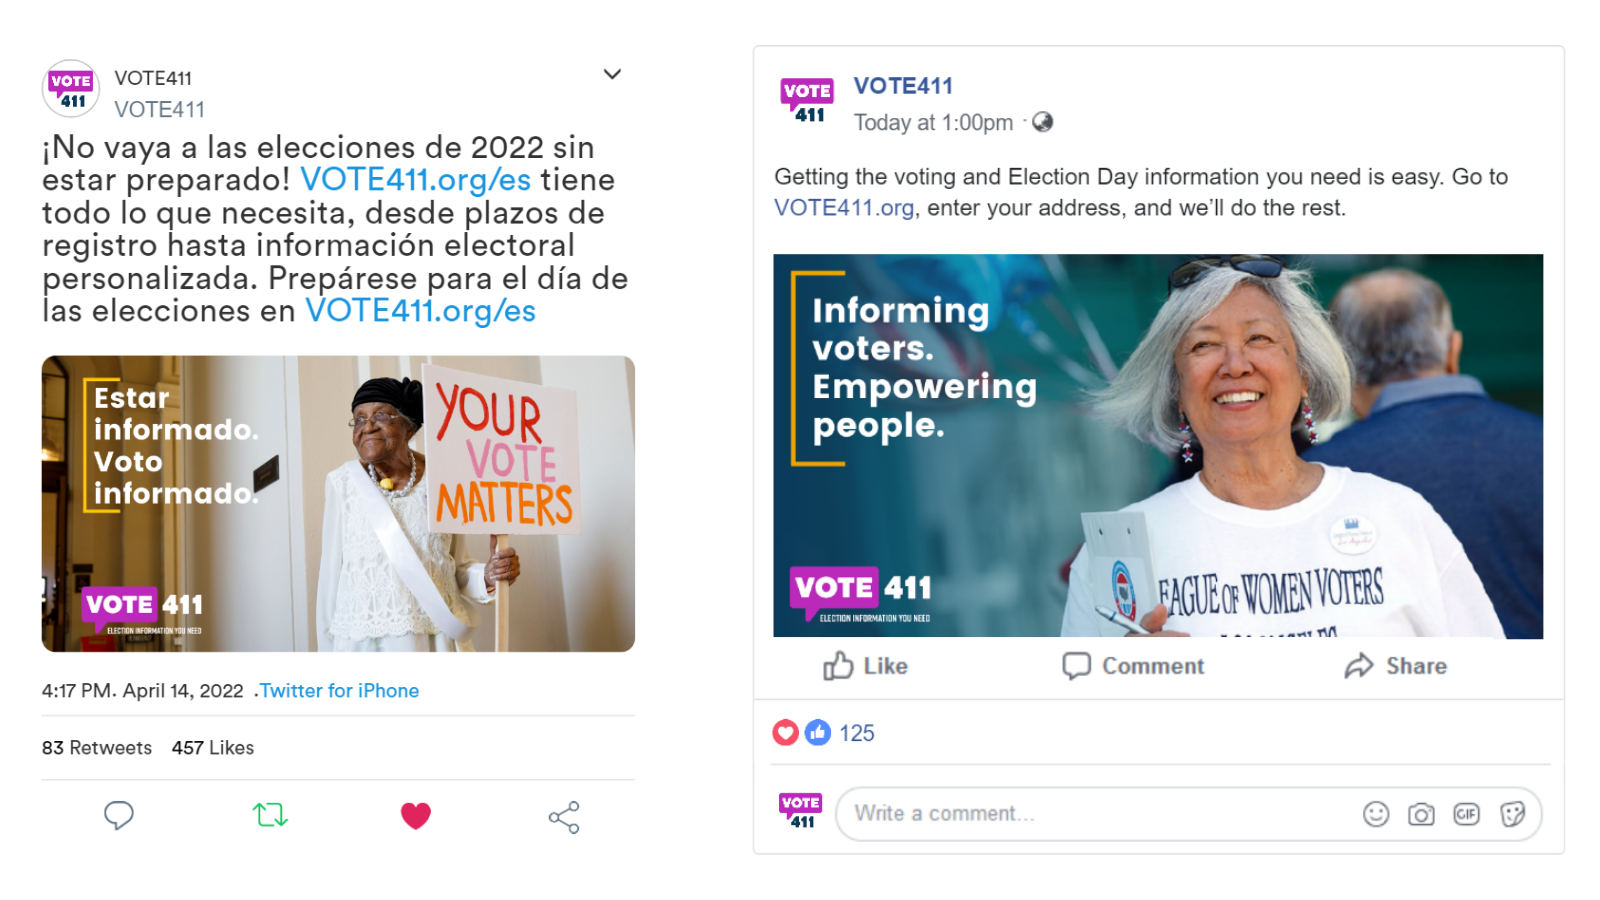 Sample VOTE411 Posts - left image is a Twitter post in Spanish. Right image is a Facebook post in English